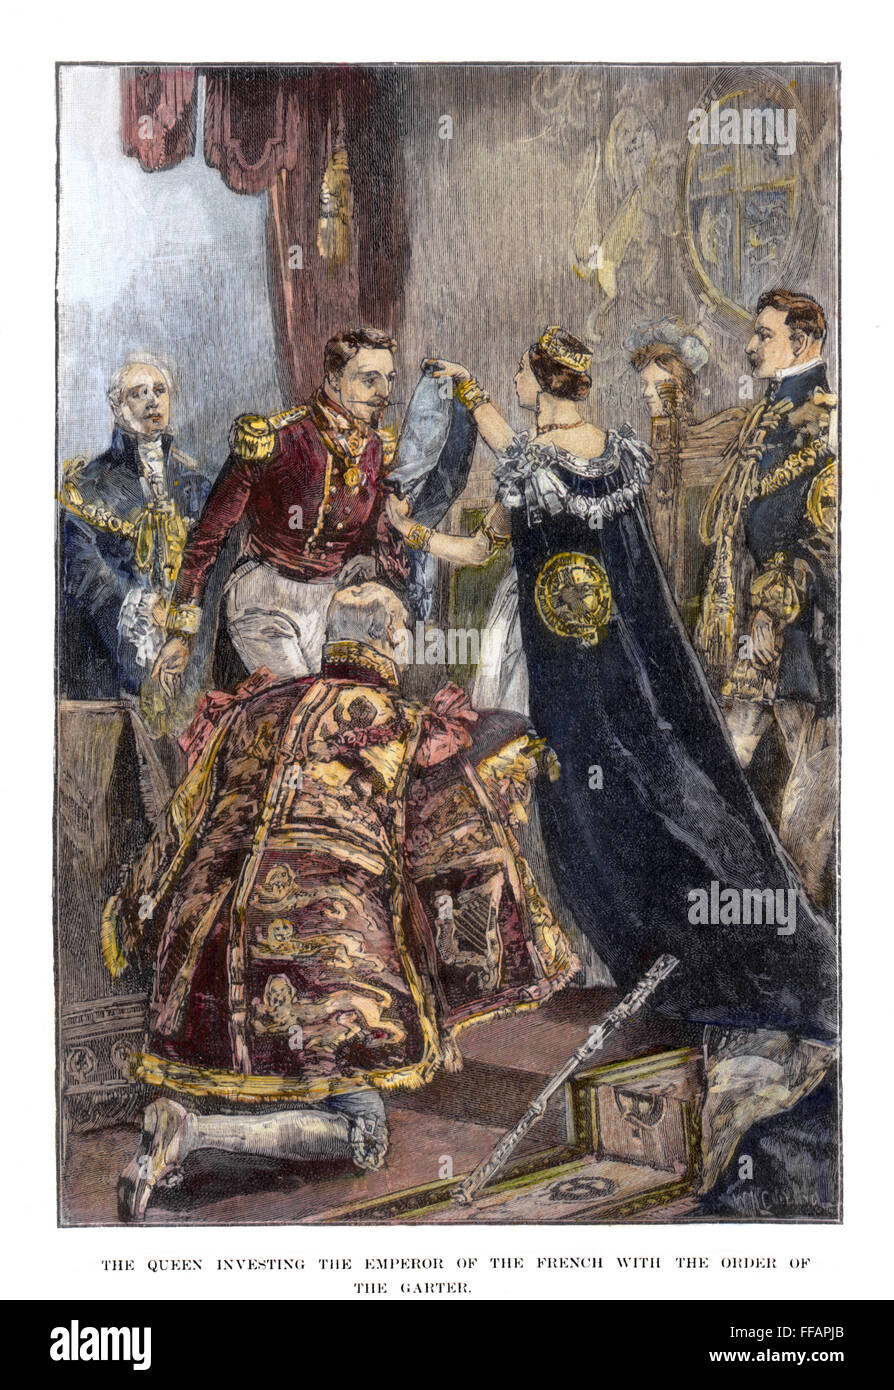 VICTORIA & NAPOLEON III. /nQueen Victoria's investiture of Emperor Napoleon III of France as Knight of the Garter, at Windsor Castle, 18 April 1855: wood engraving, late 19th century. Stock Photo